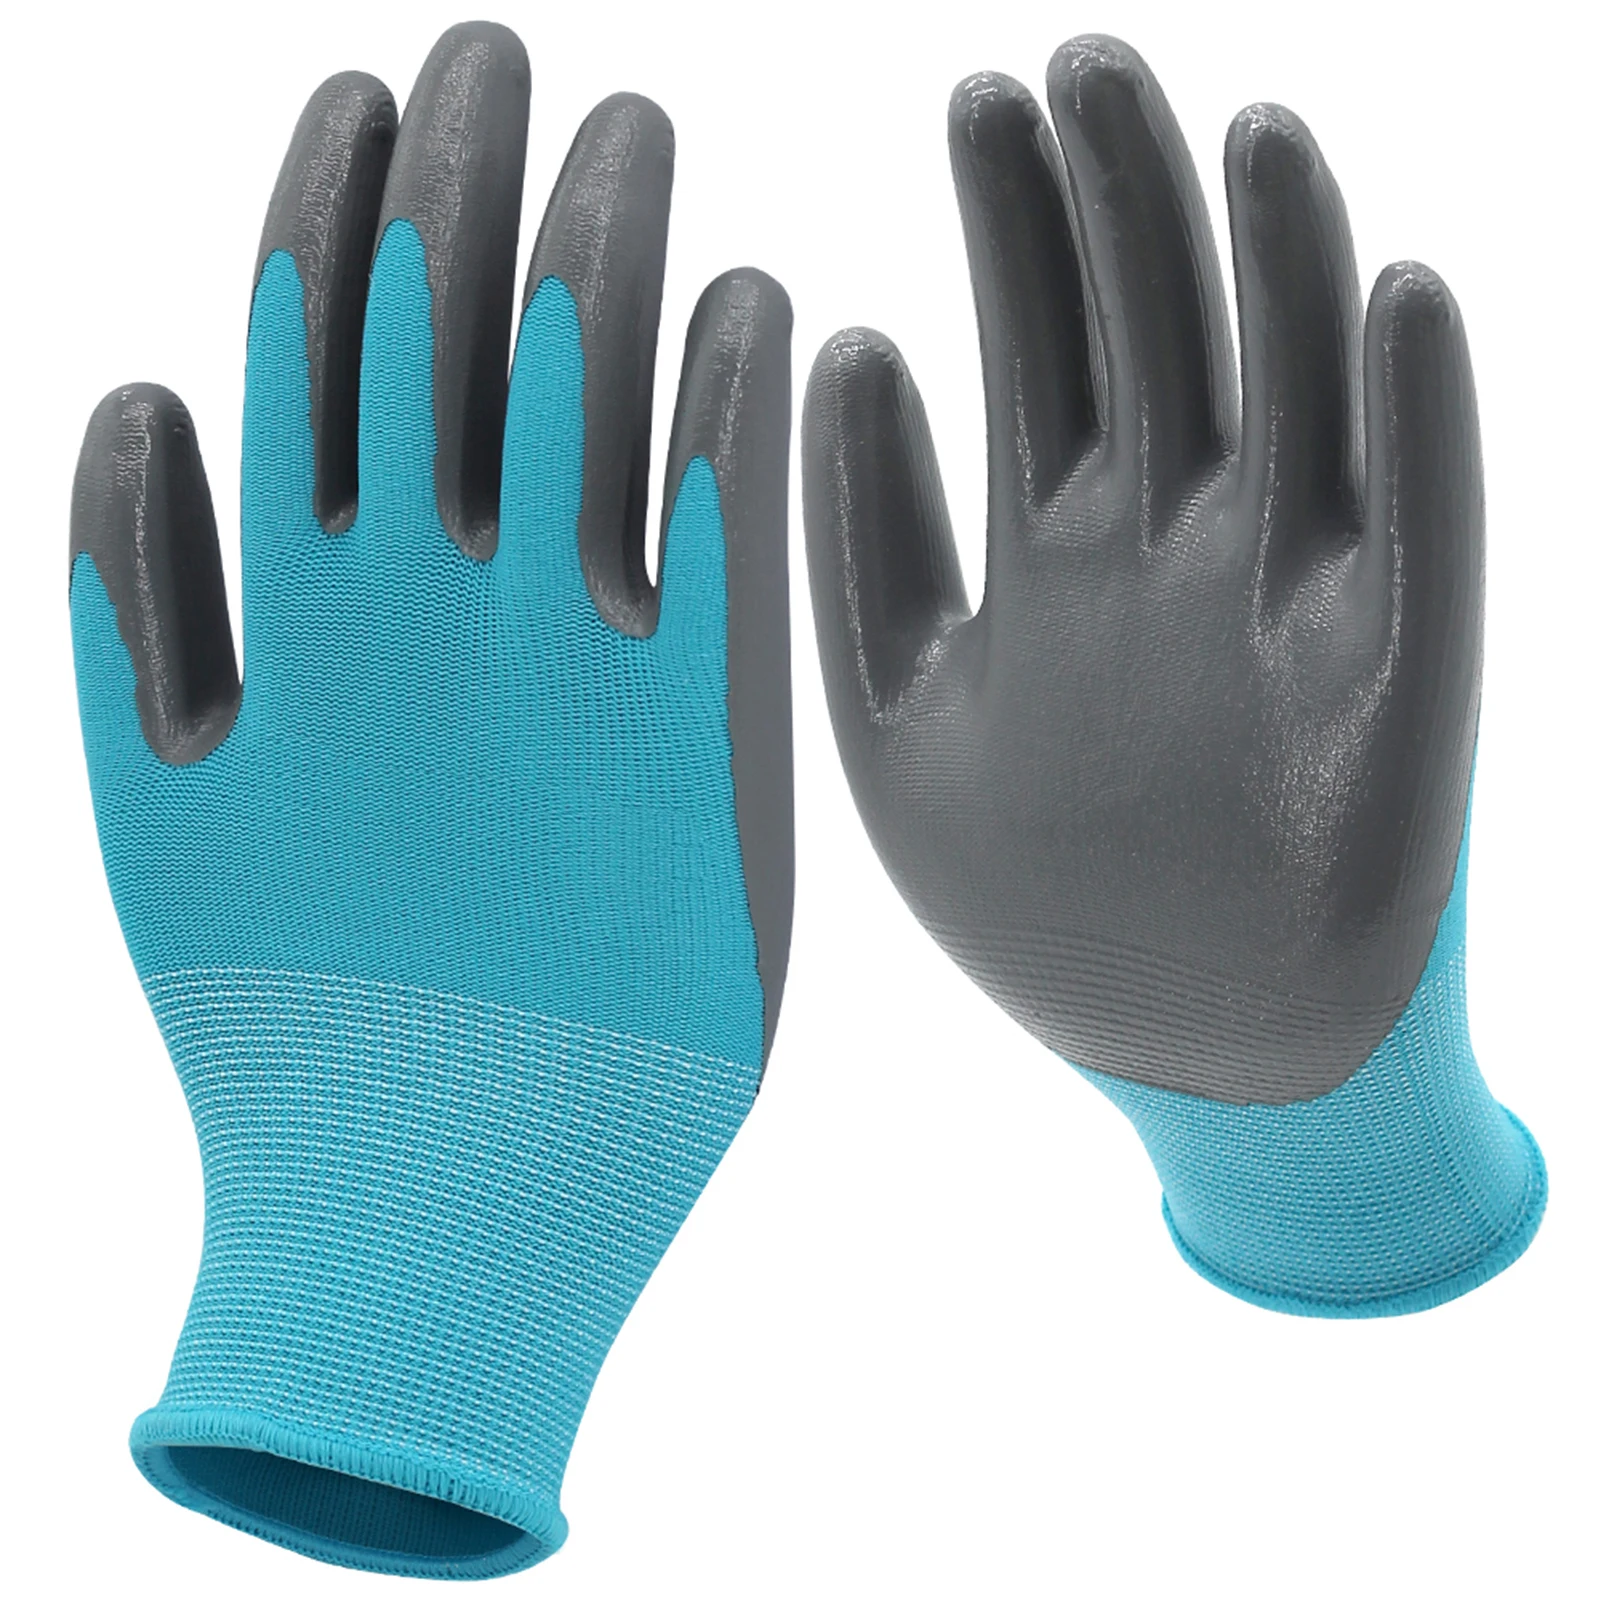 Gardening Gloves for Women and Men, Nitrile & Rubber Coated Protective, Blue, Green, Grey, Pink